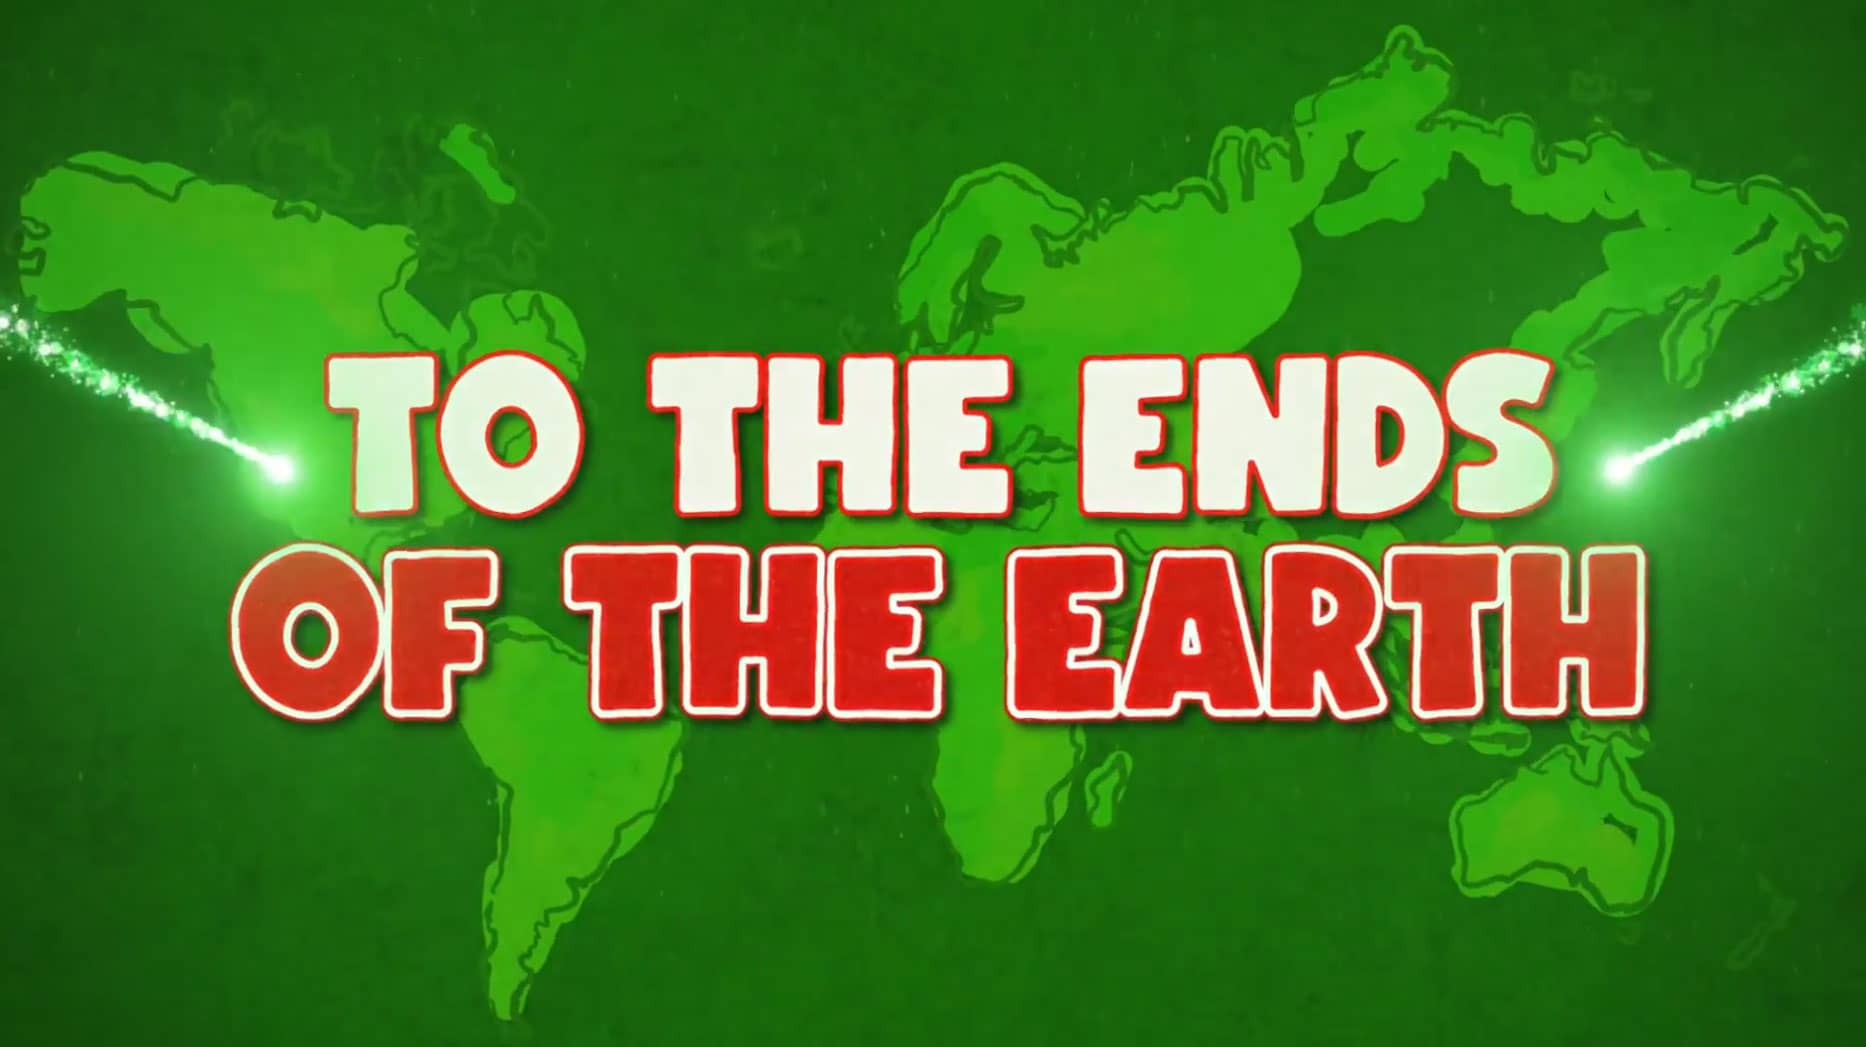 To The Ends of the Earth Christmas Worship Video For Kids